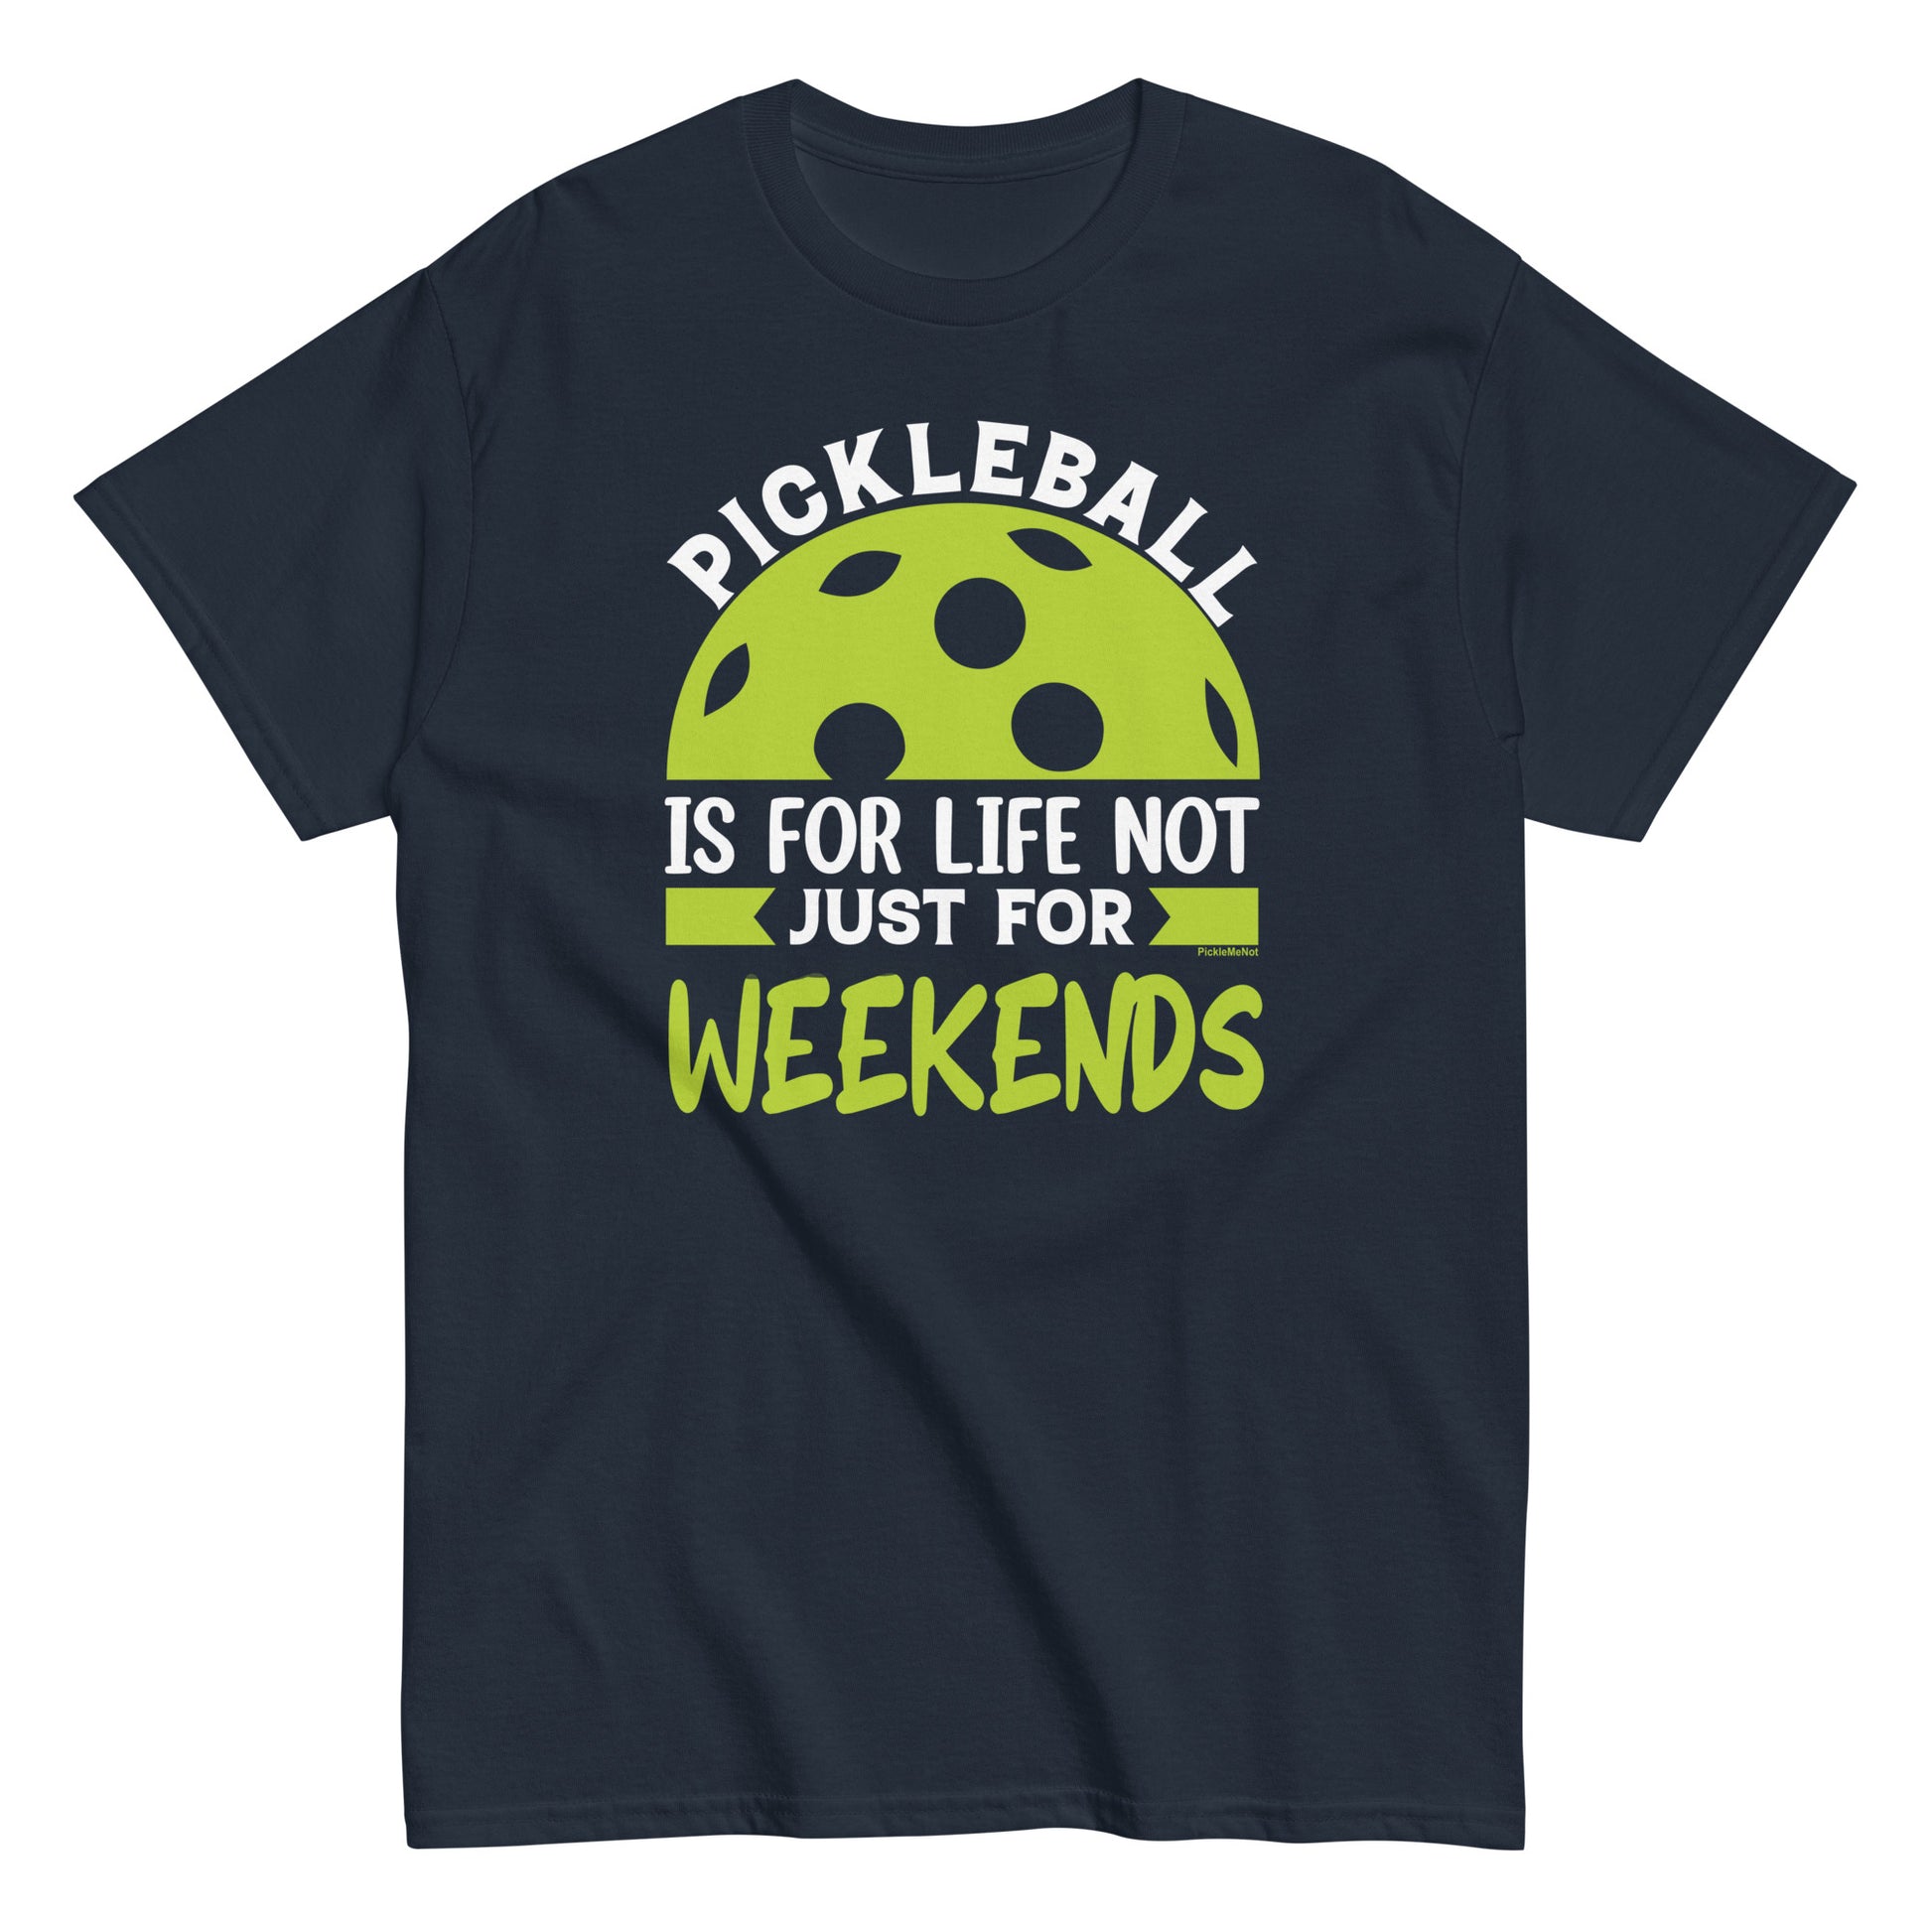 Fun Distressed Pickleball, "Pickleball Is For Life, Not Just The Weekend" Men's Classic Navy Tee